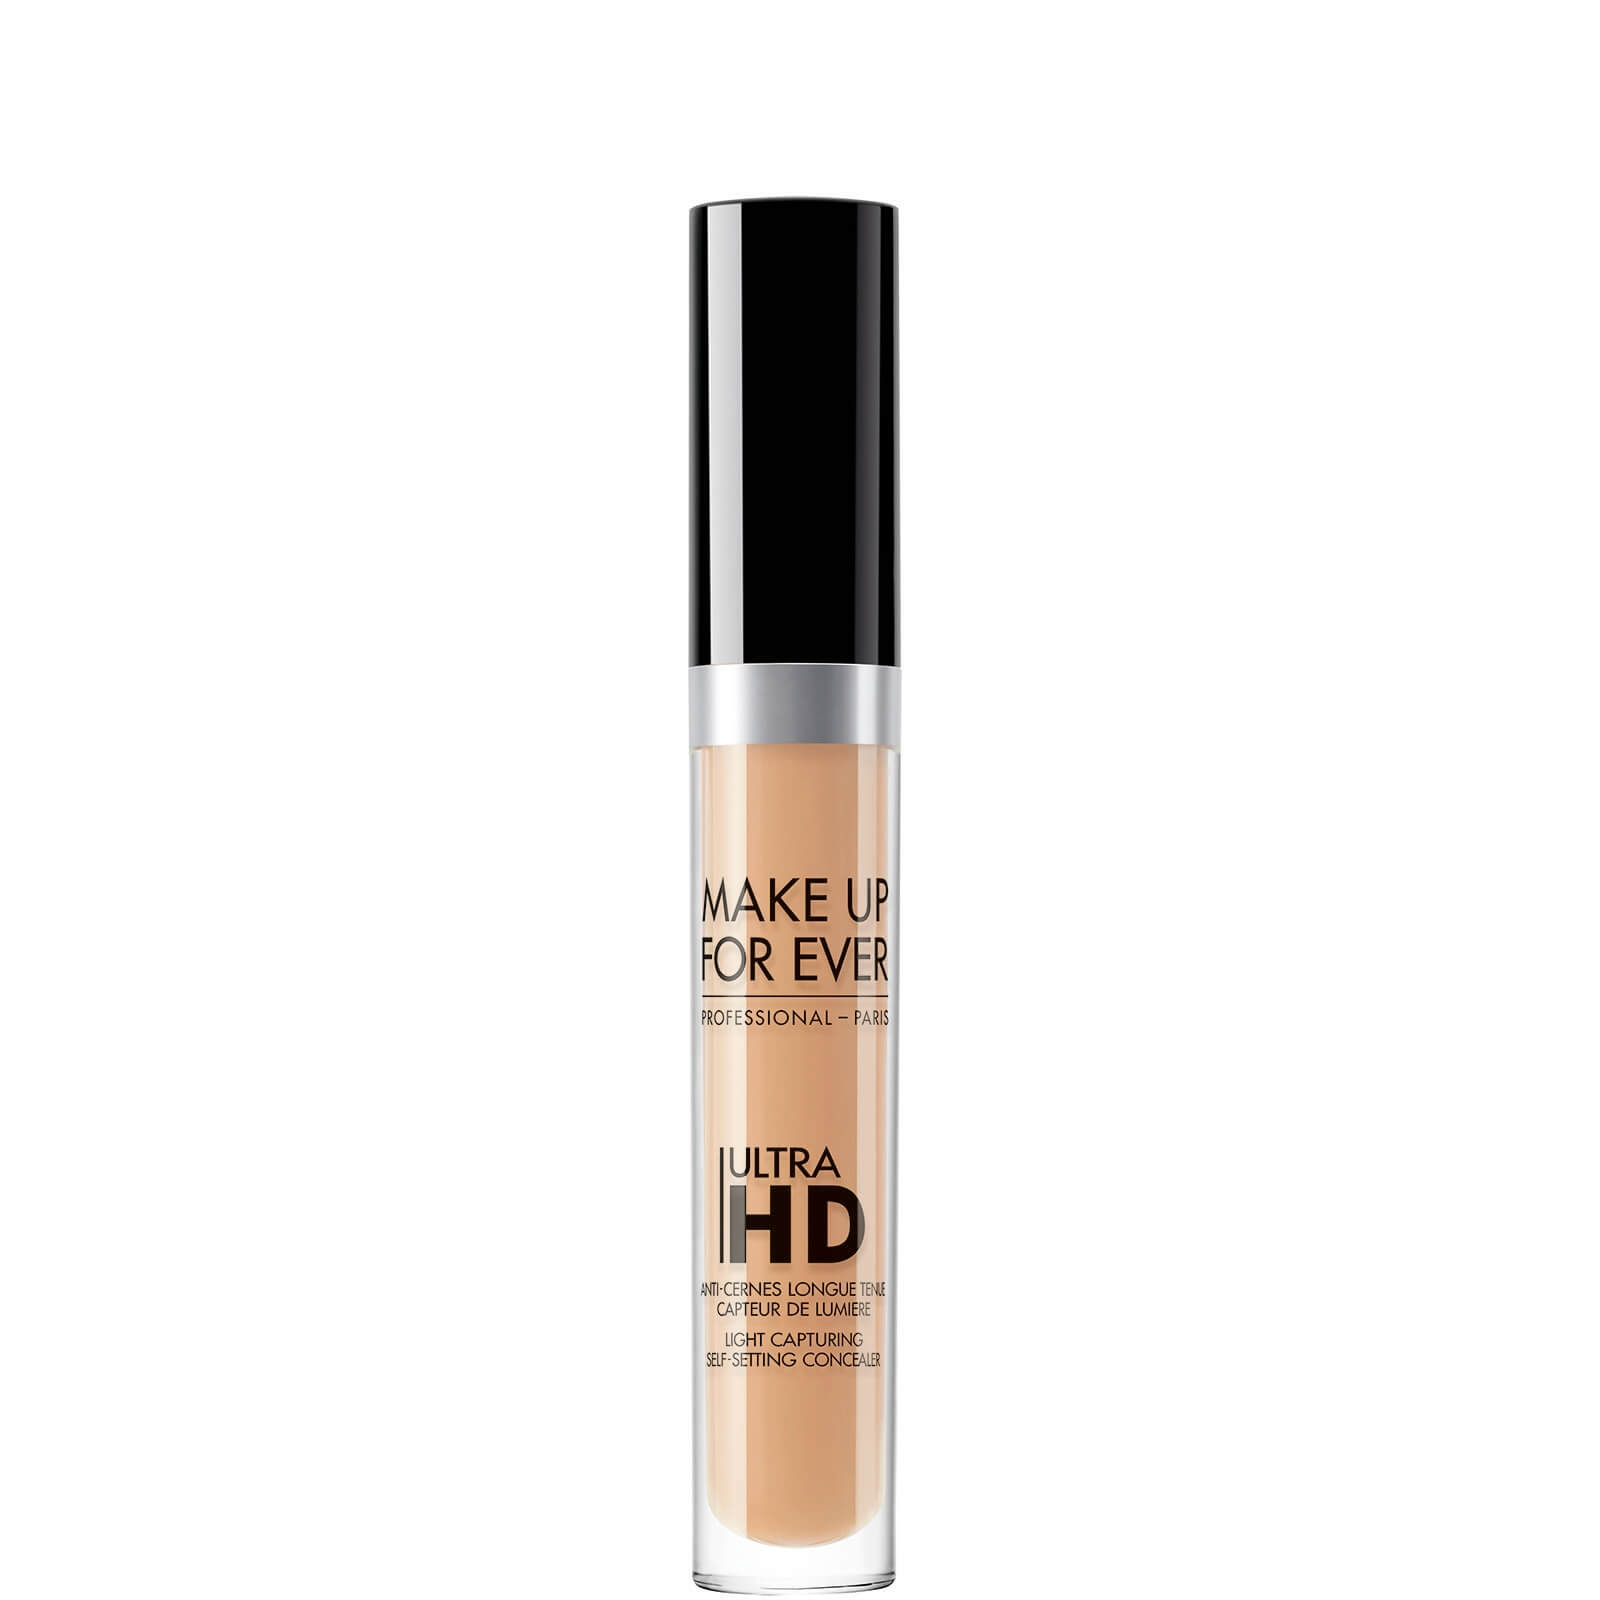 MAKE UP FOR EVER ultra Hd Self-Setting Concealer 5ml (Various Shades) - - 31 Macadamia